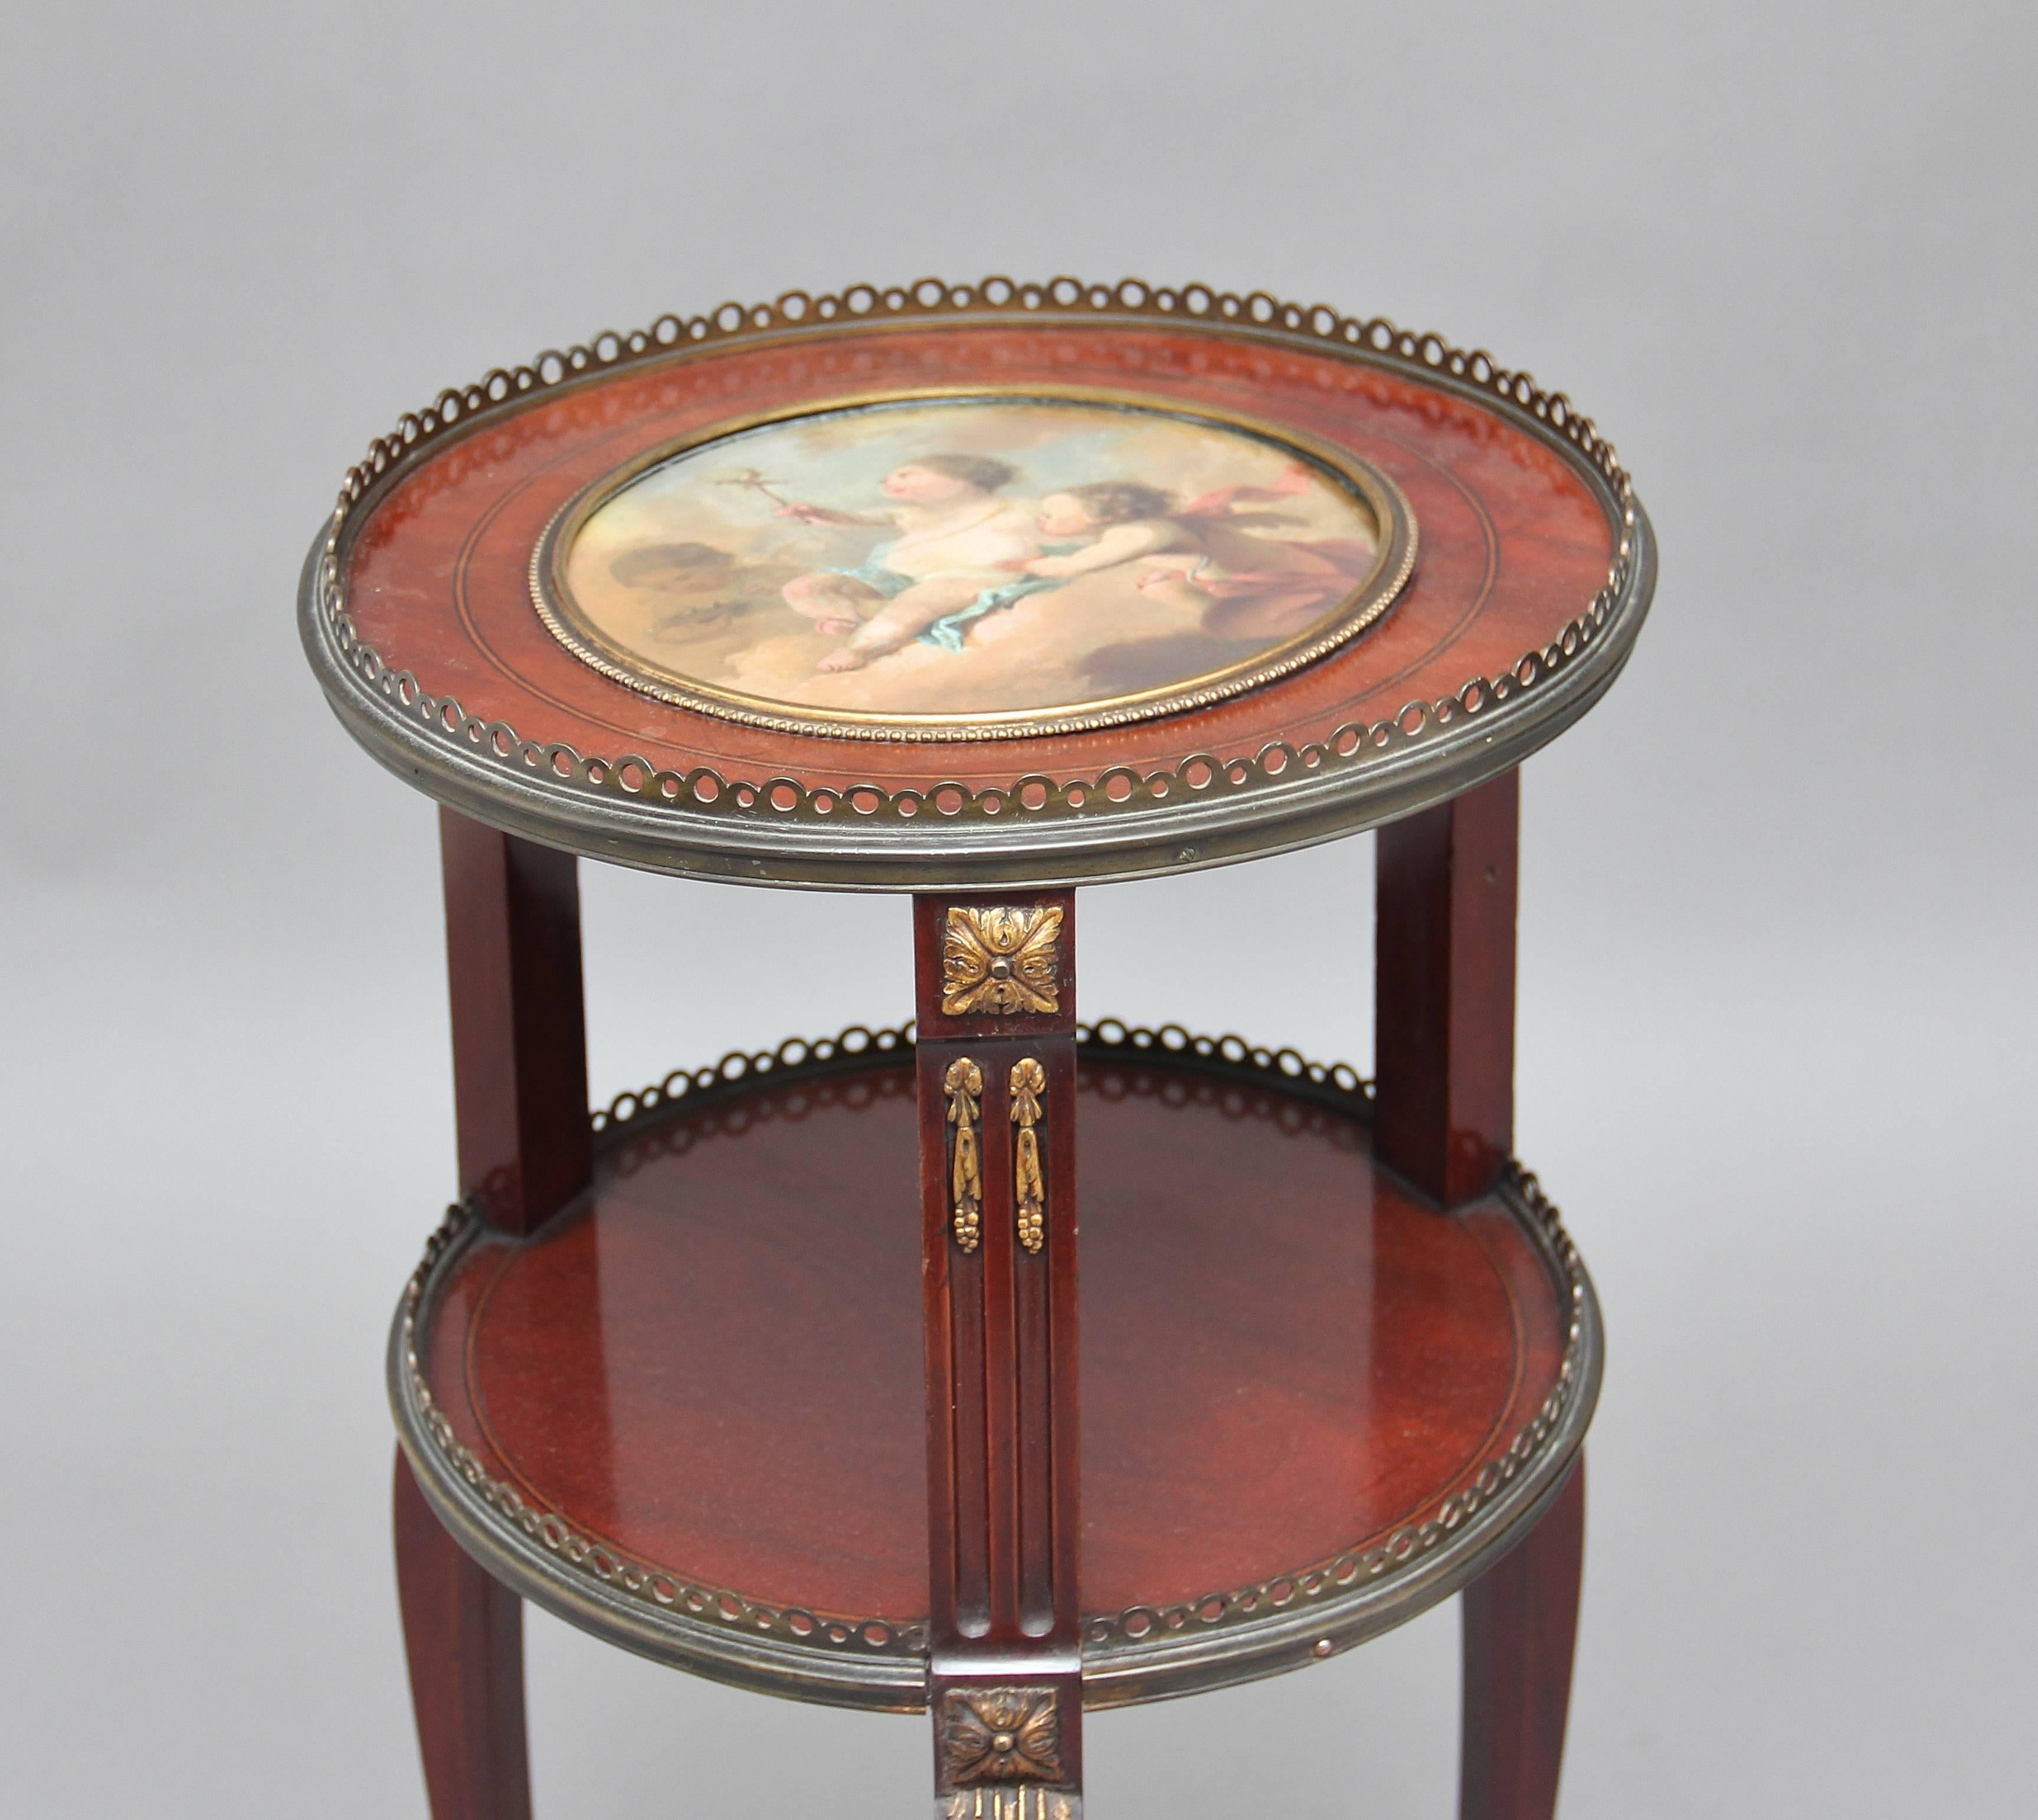 19th century French two-tier mahogany occasional table, the top having a brass gallery and a round section with a wonderfully painted picture under glass in the 18th century style depicting three cherubs, outside of the glass having a nice brass